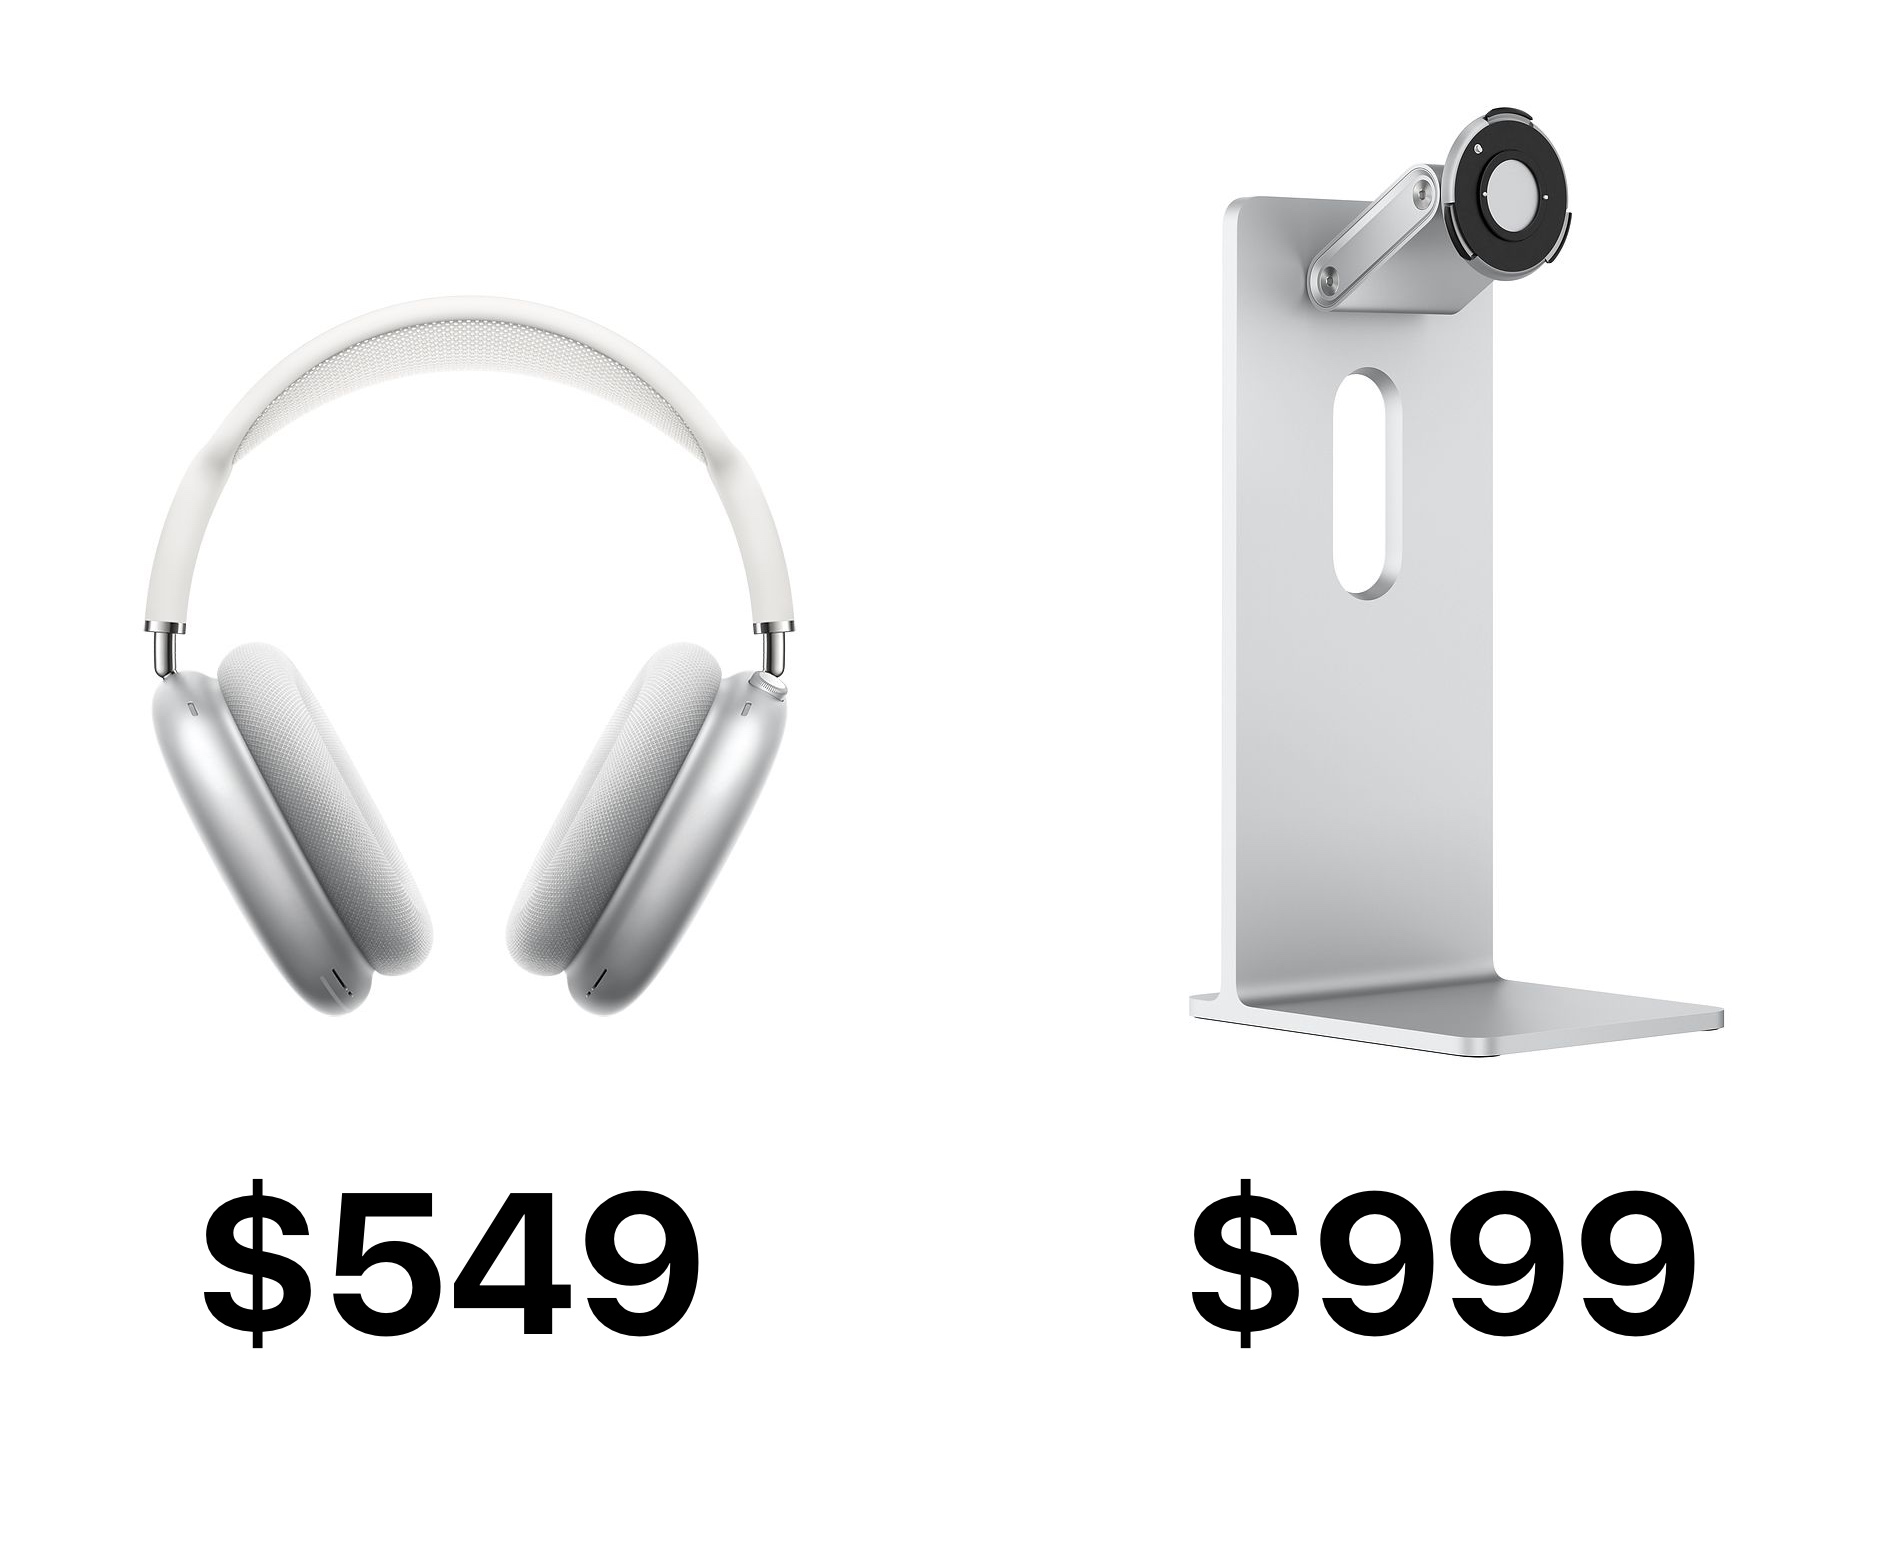 AirPods Max: Heck yeah, they are expensive, and rightfully so